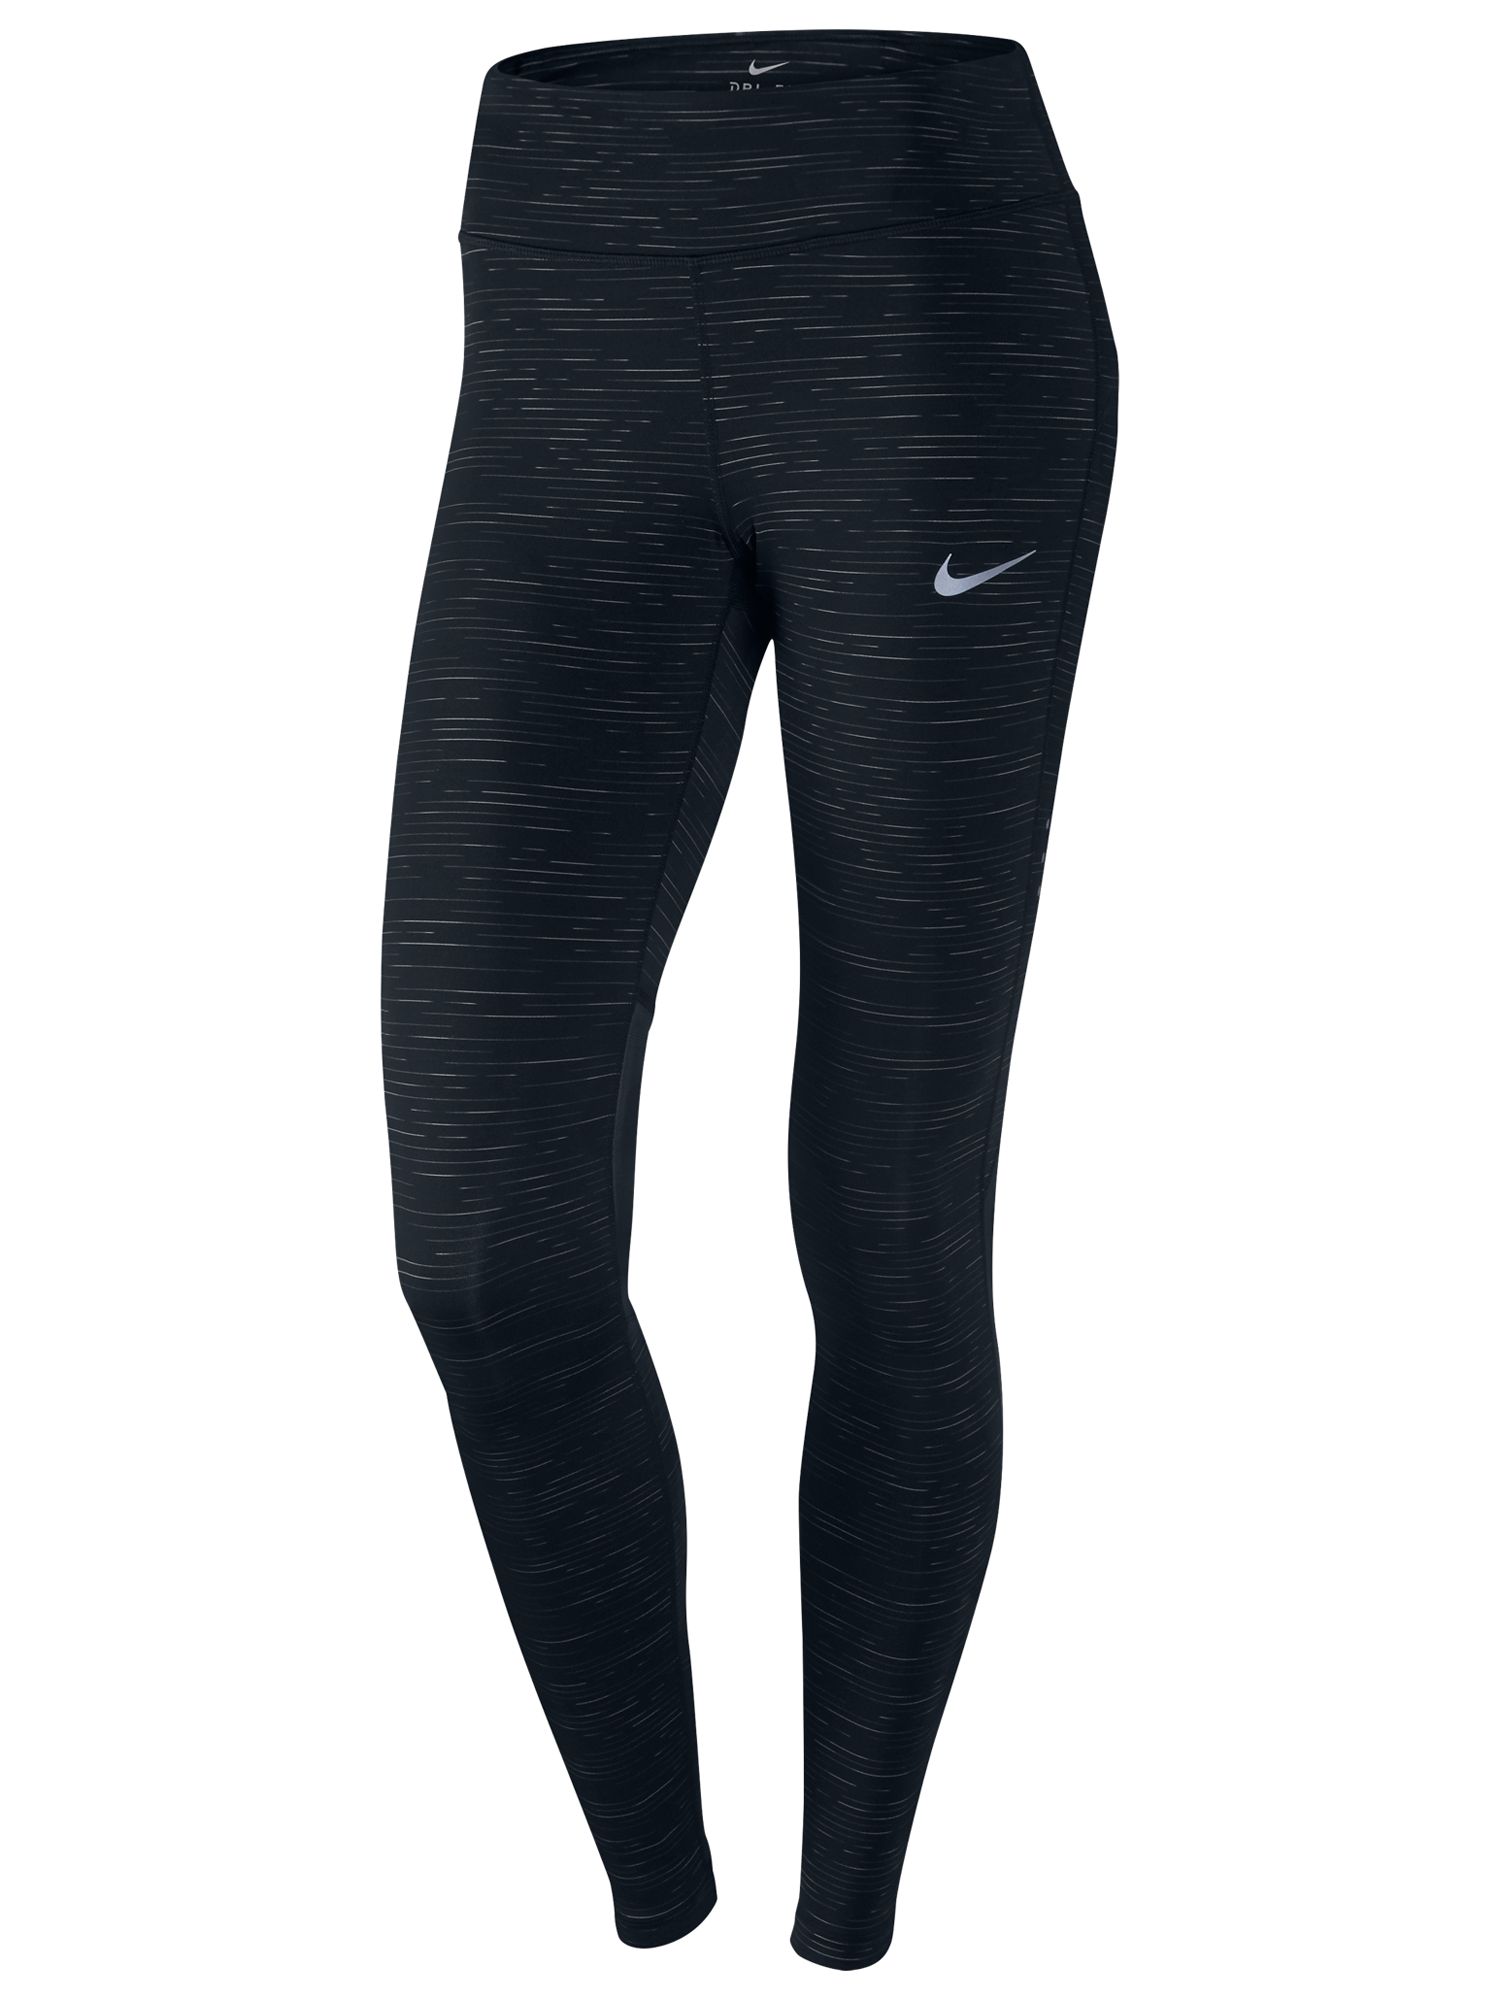 nike power epic lux tights